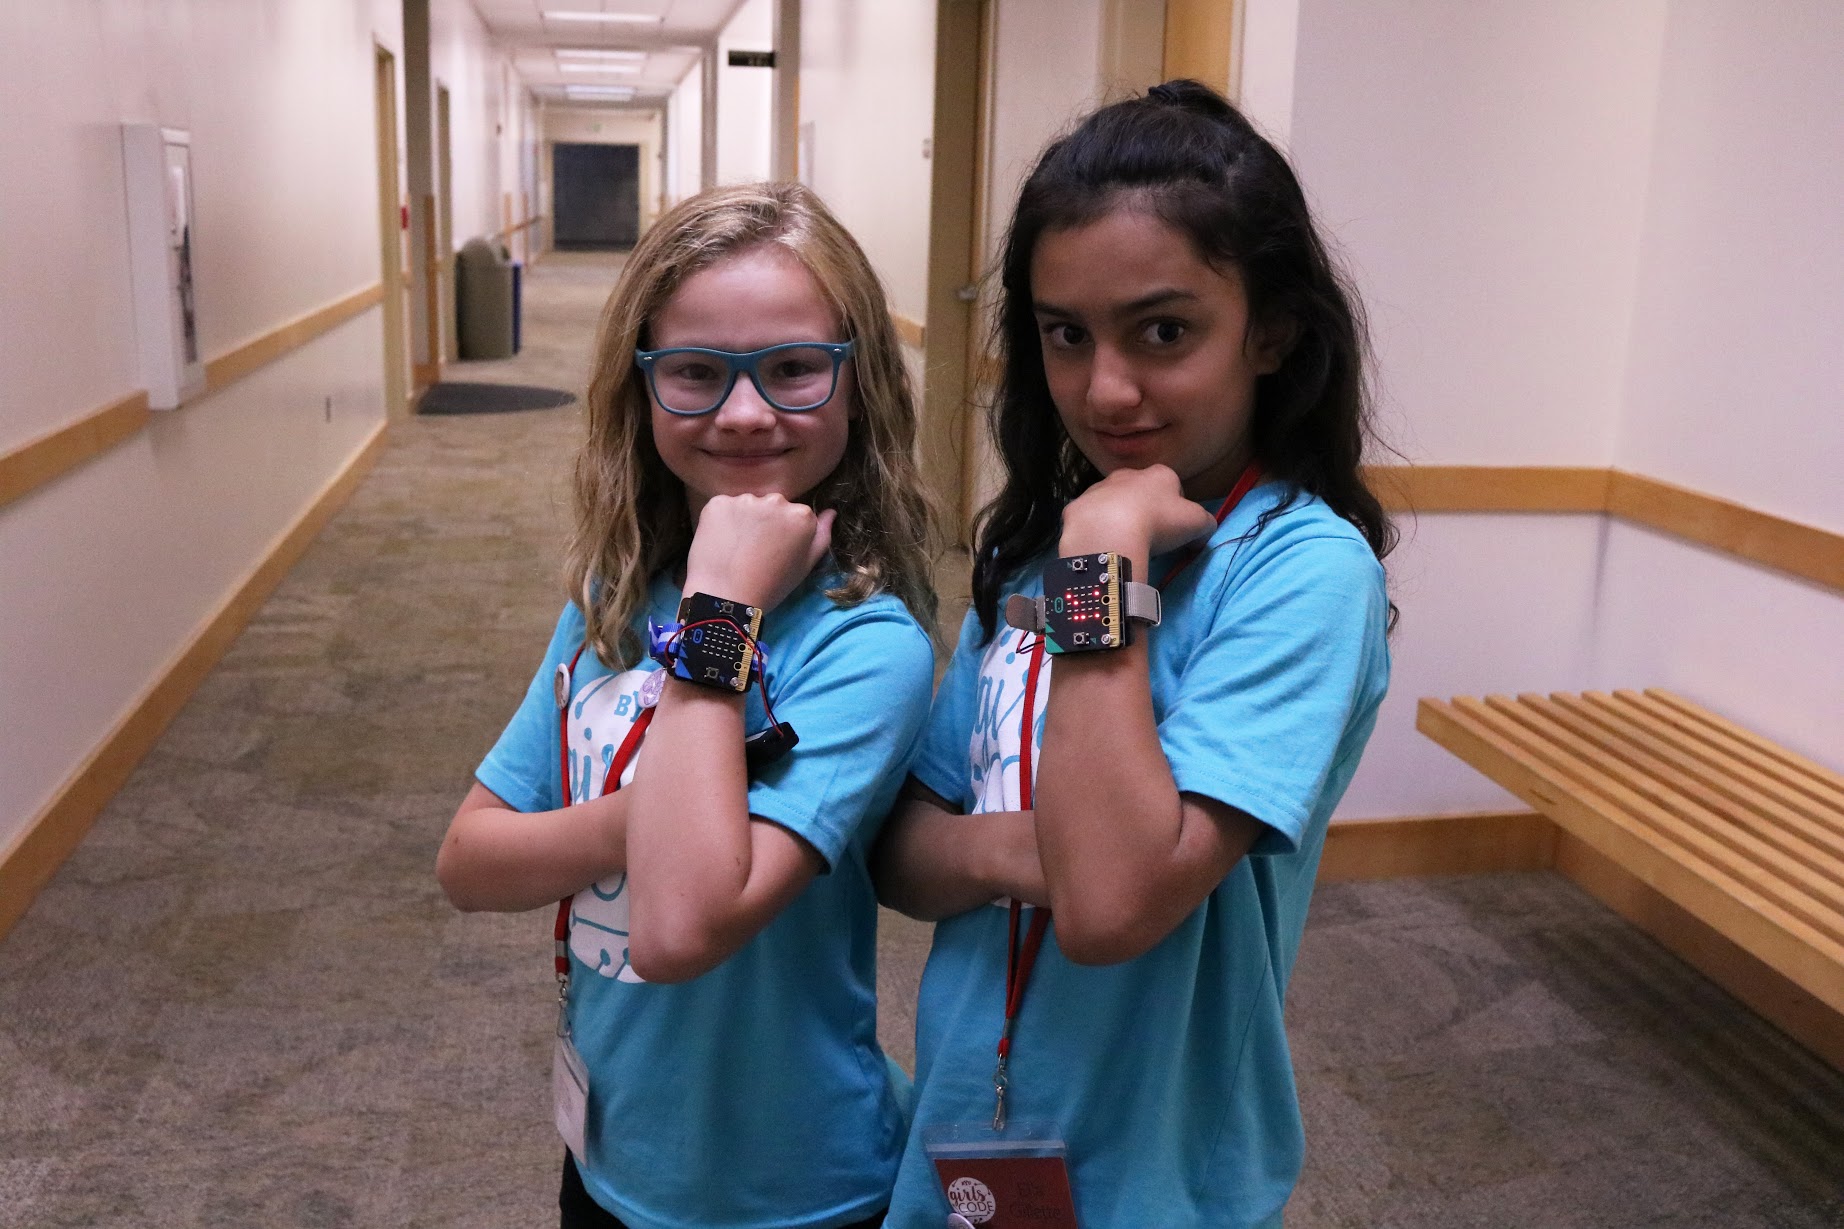 BYU youth camps encourage girls' participation in STEM fields The